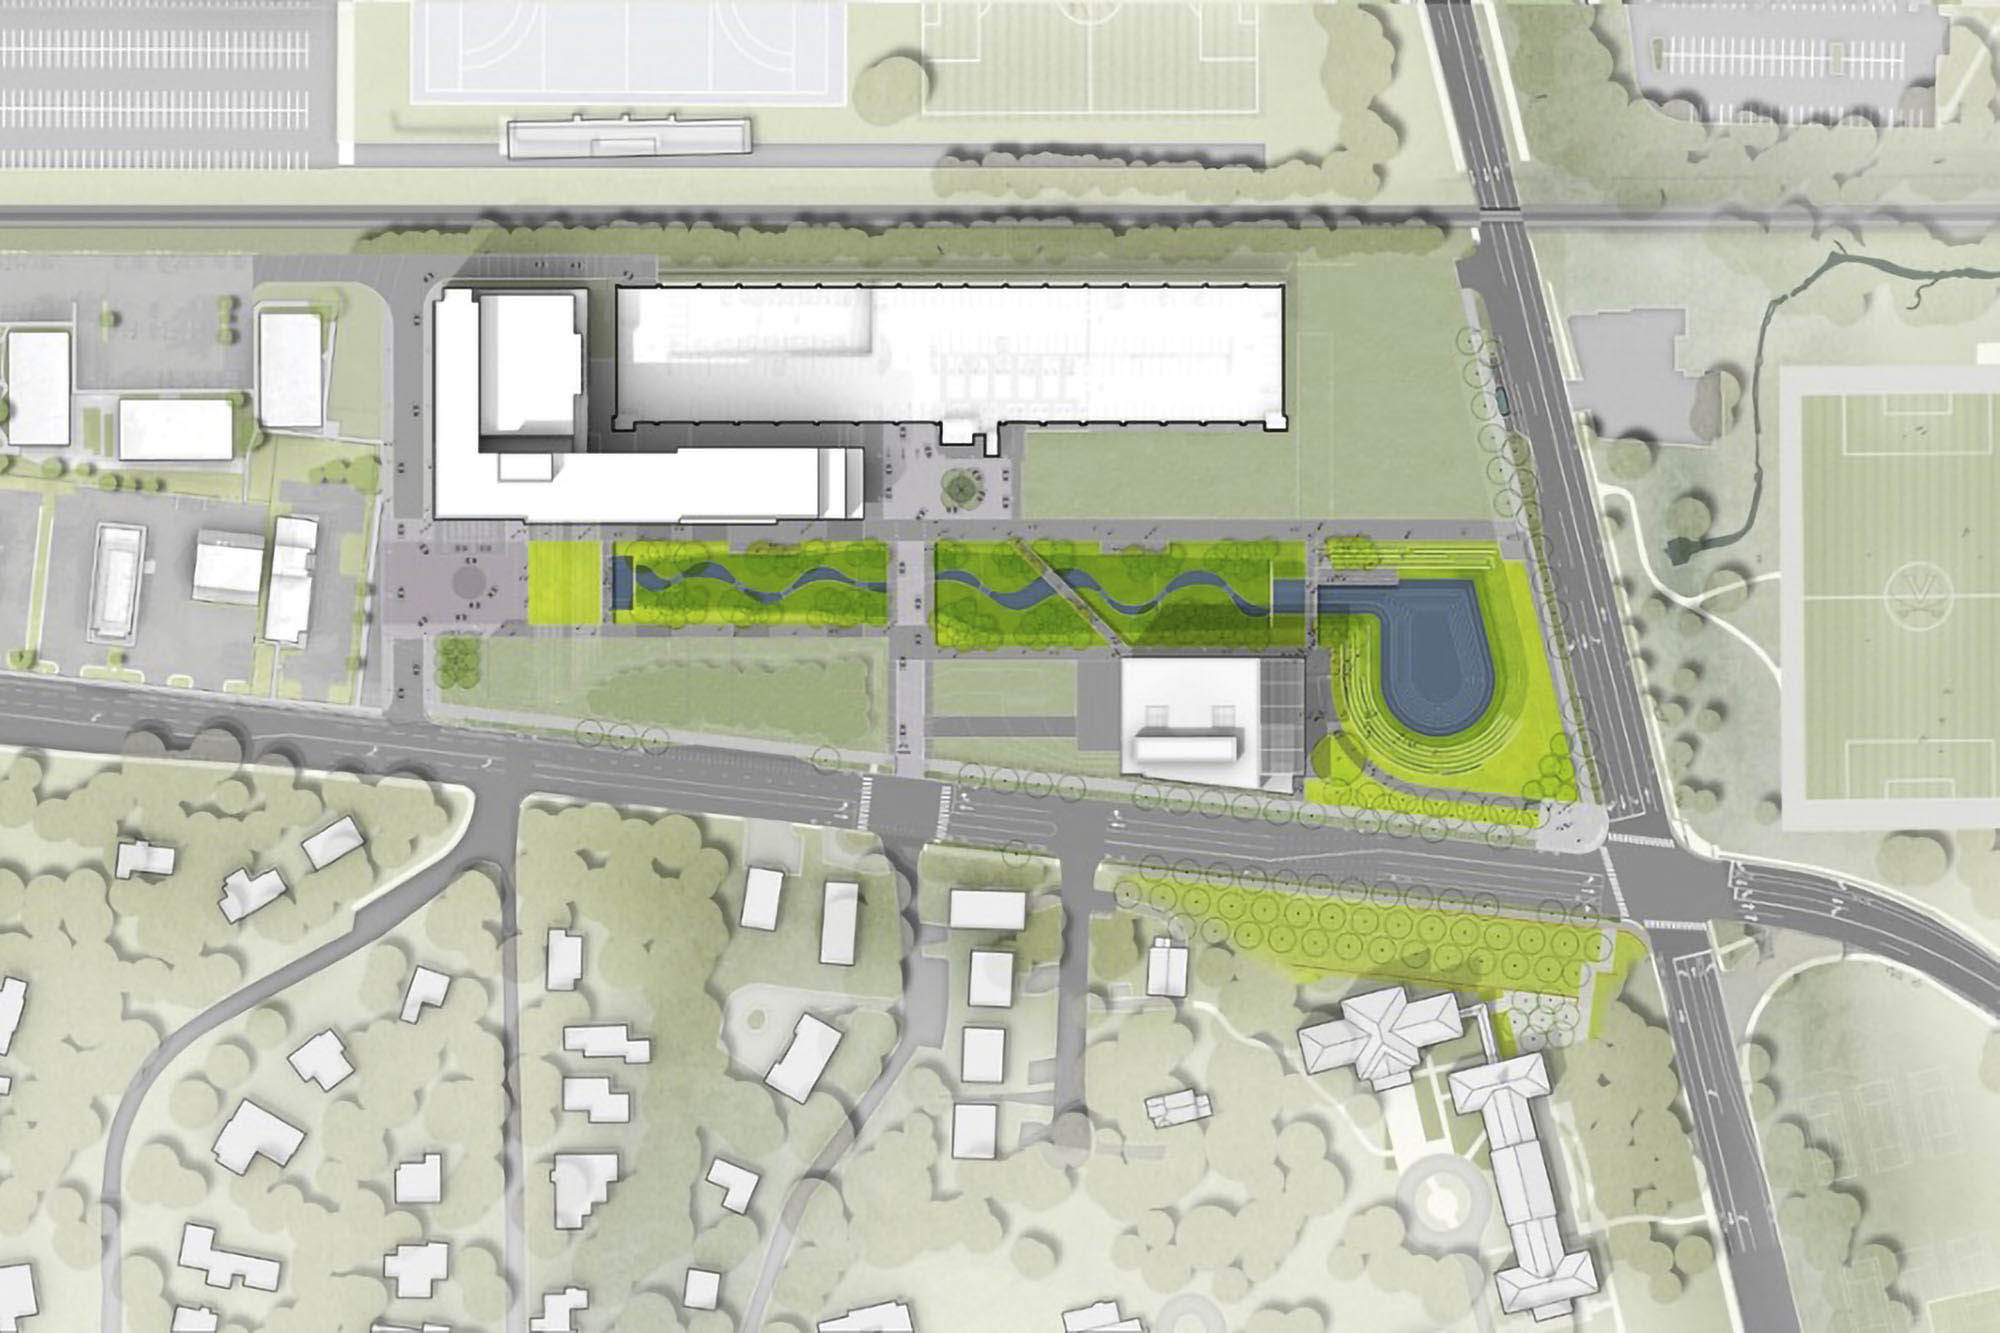 Sketch of the projects at the Emmet-Ivy property.